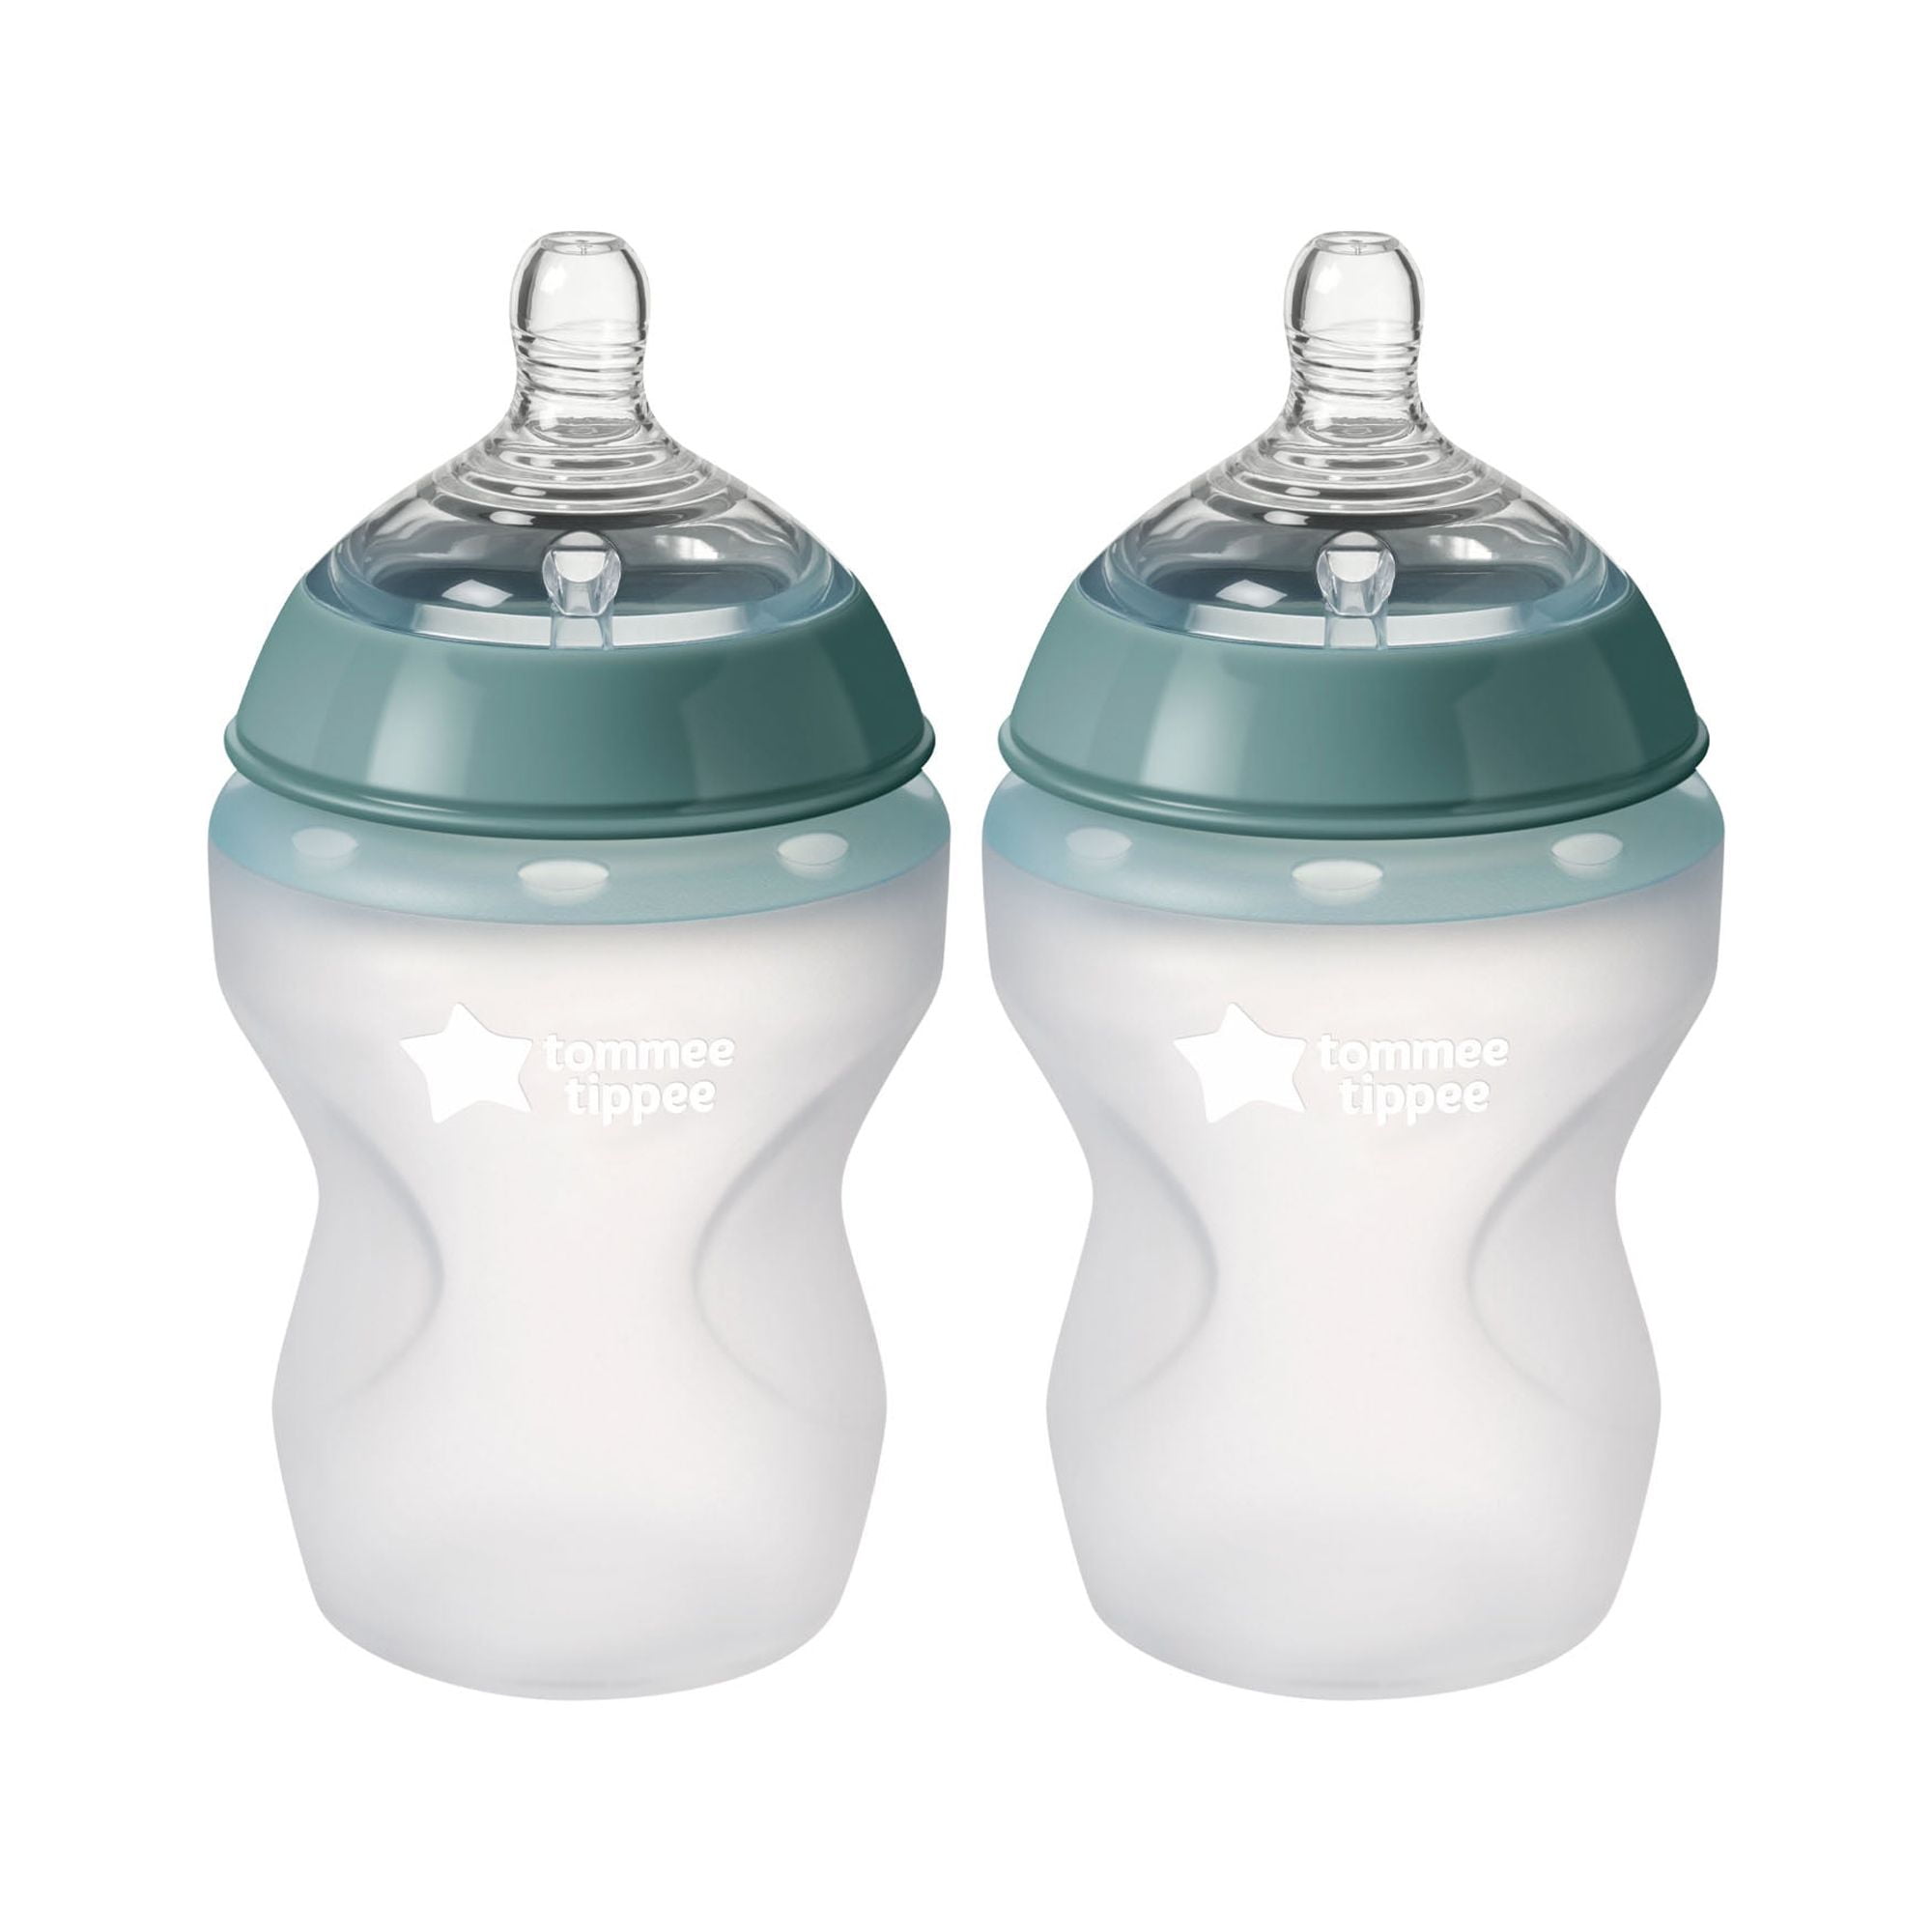 Tommee Tippee Closer to Nature Soft Feel Silicone Baby Bottle (9oz, 2  Count, Blue) 